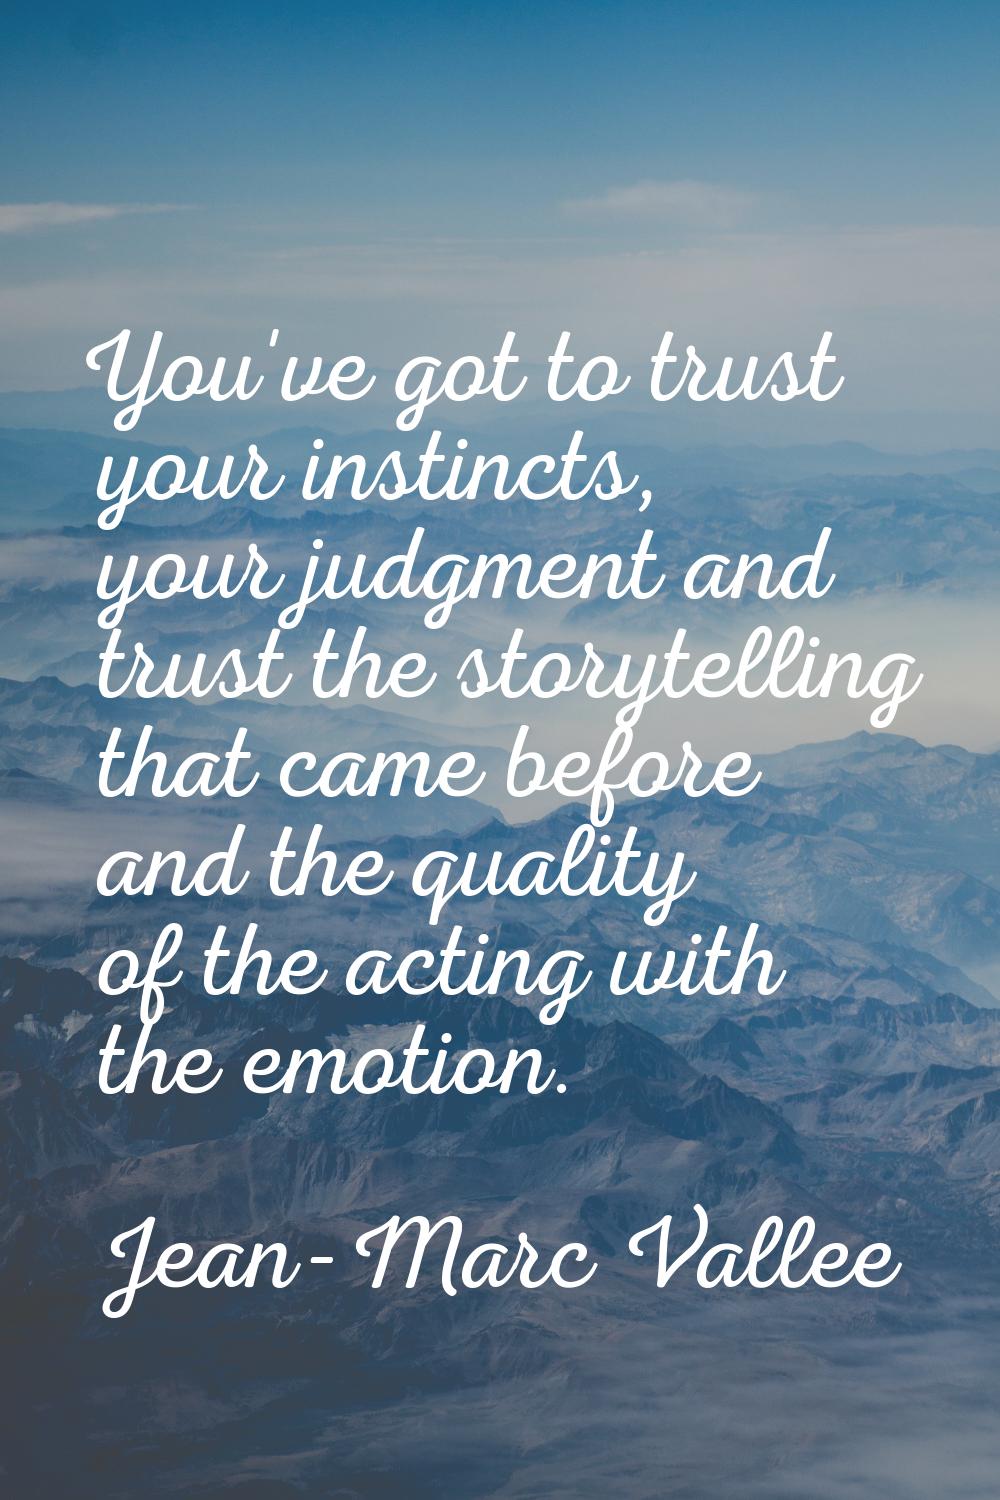 You've got to trust your instincts, your judgment and trust the storytelling that came before and t